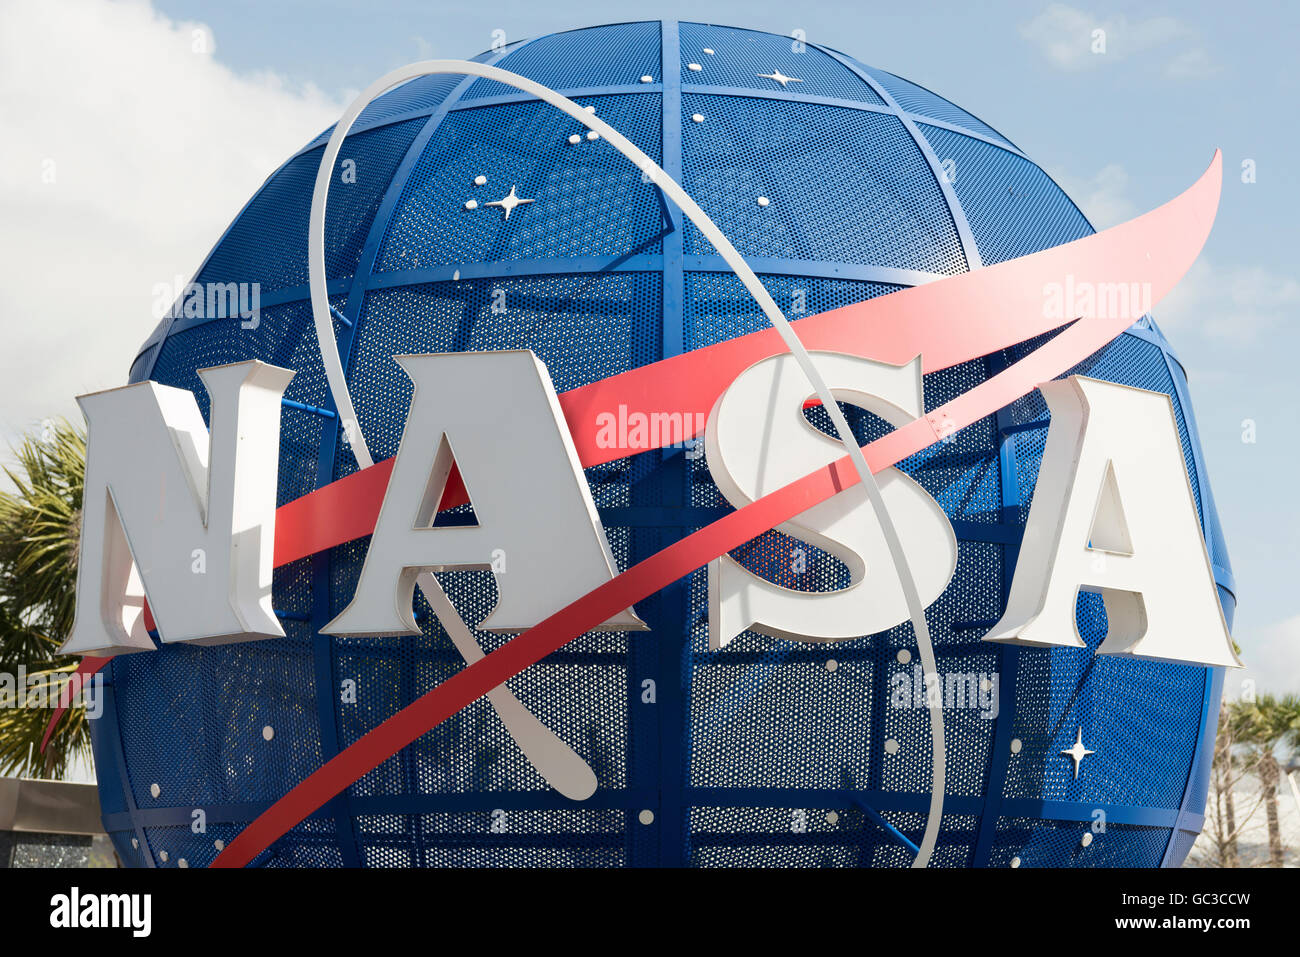 Eingang, Kennedy Space Center, NASA-Raumstation, Cape Canaveral, Florida, USA Stockfoto